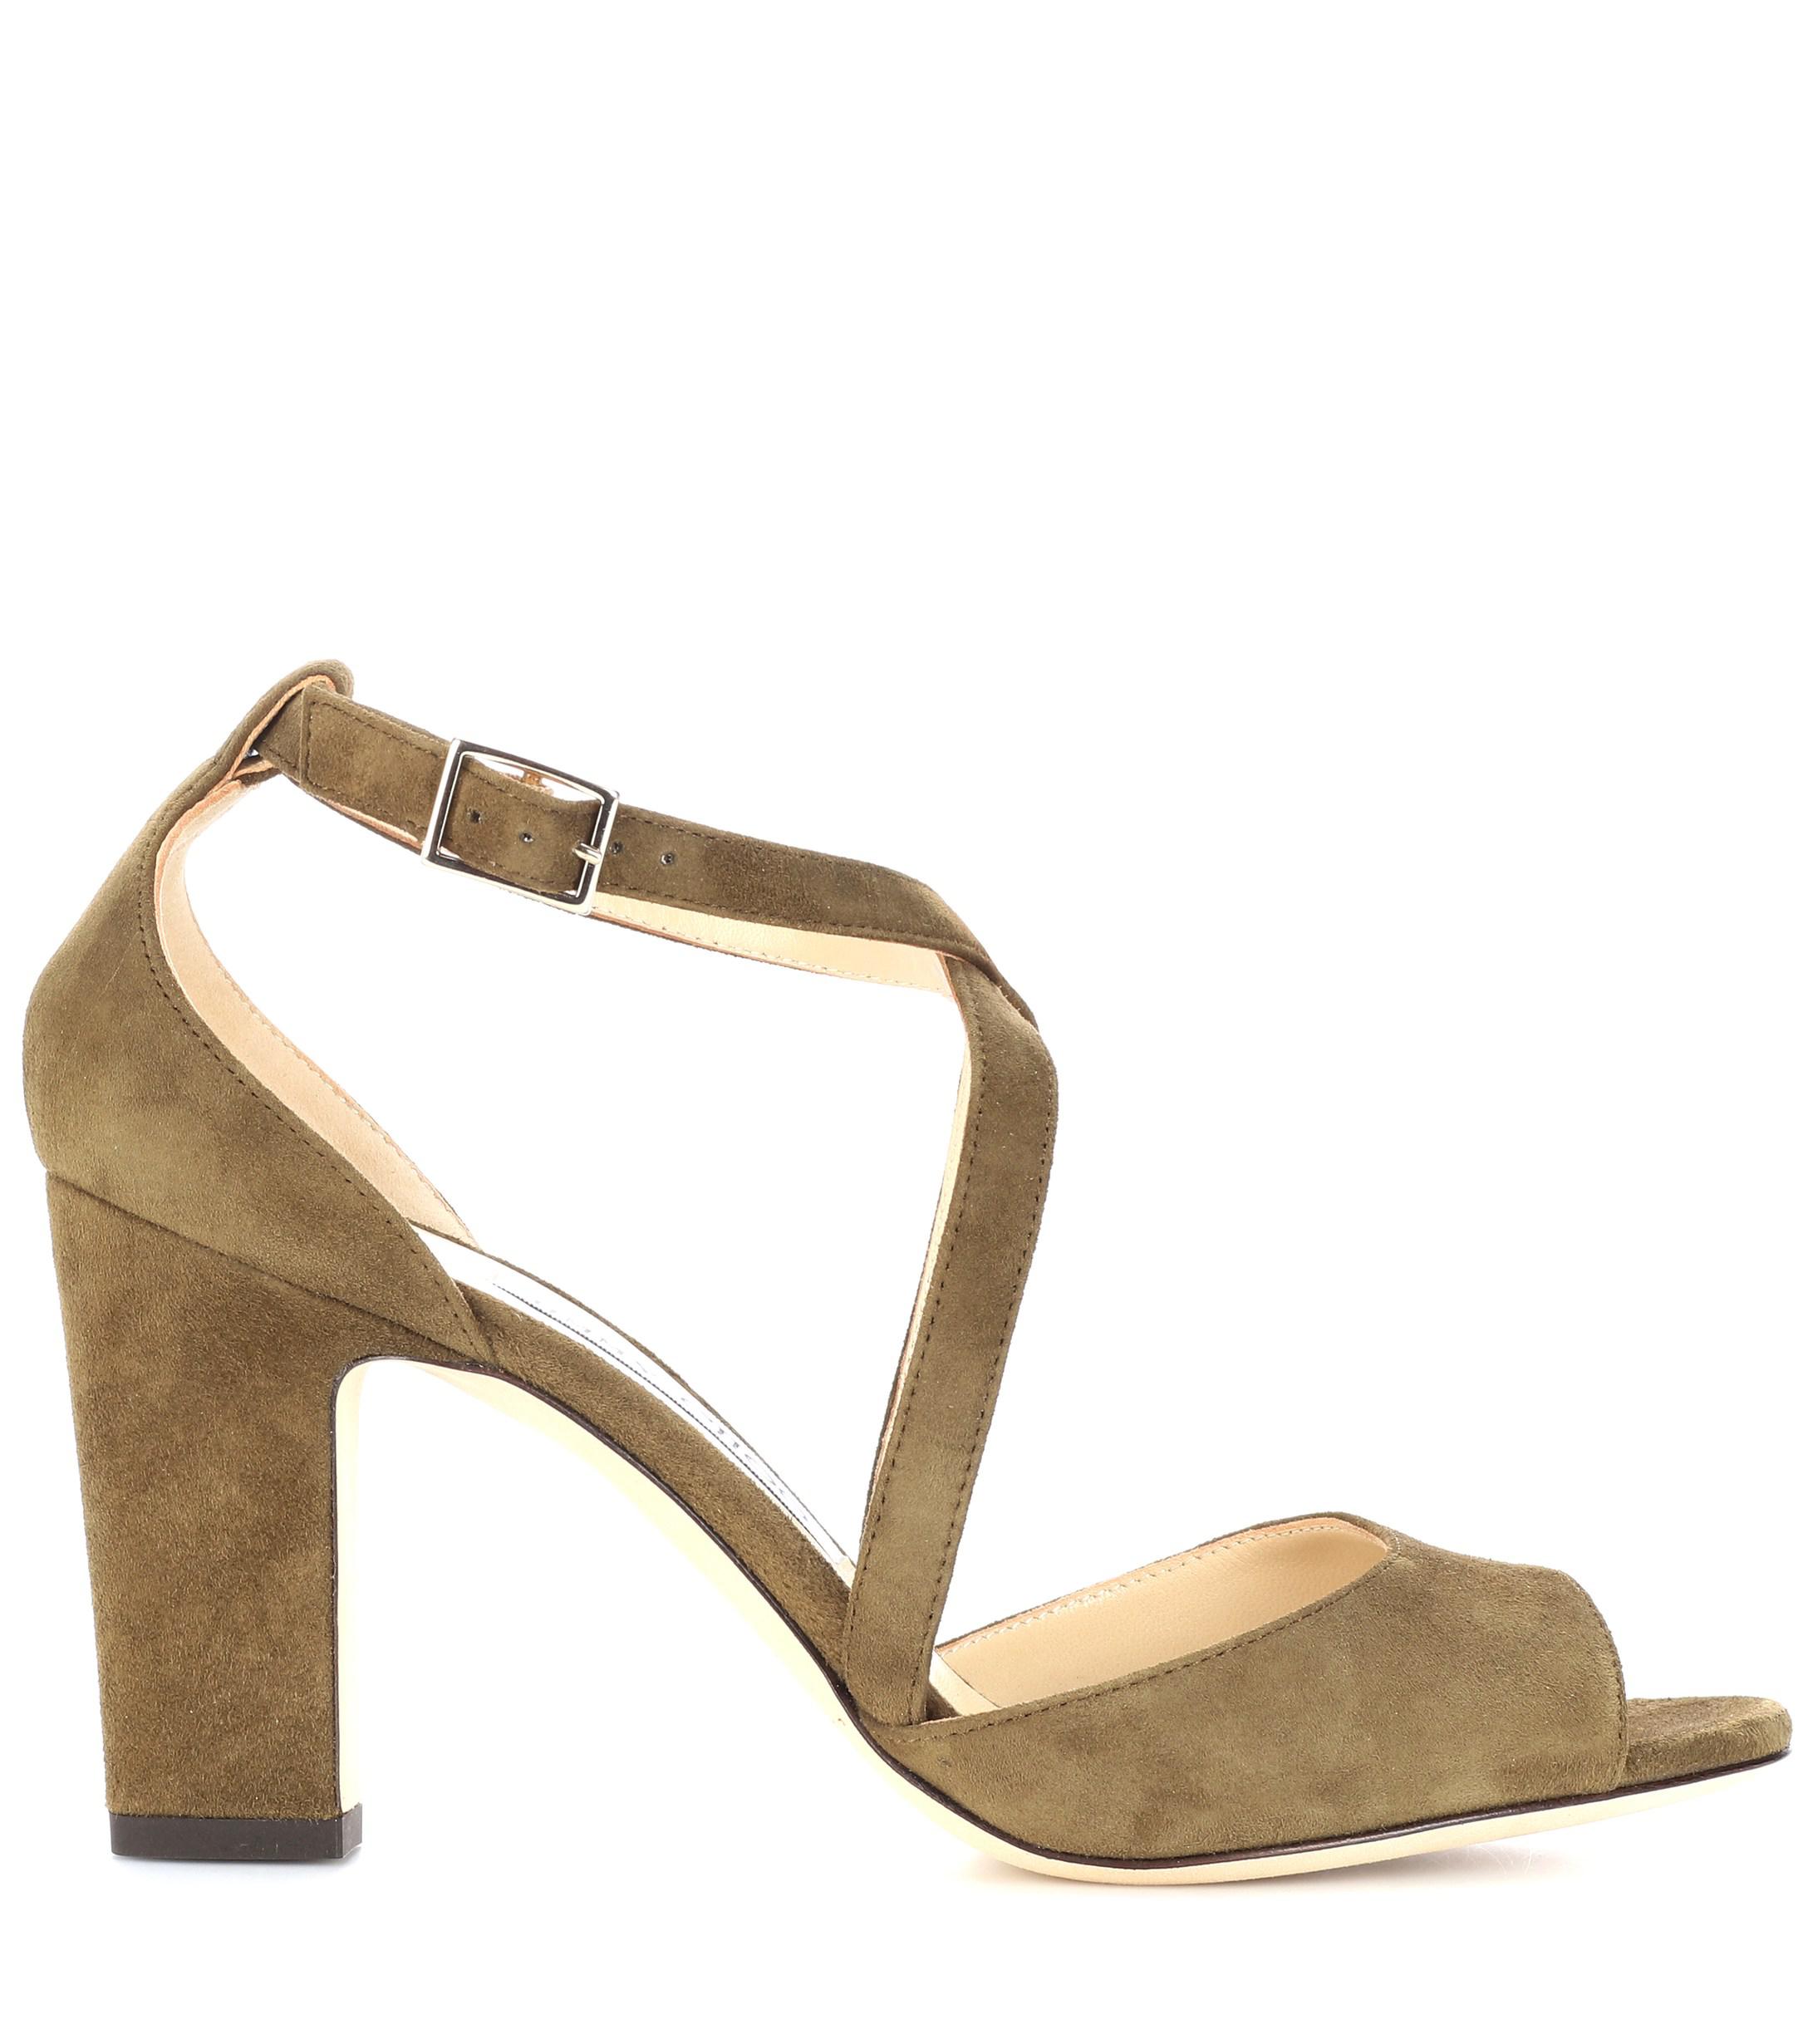 Jimmy Choo Carrie 85 Suede Sandals in Green - Lyst